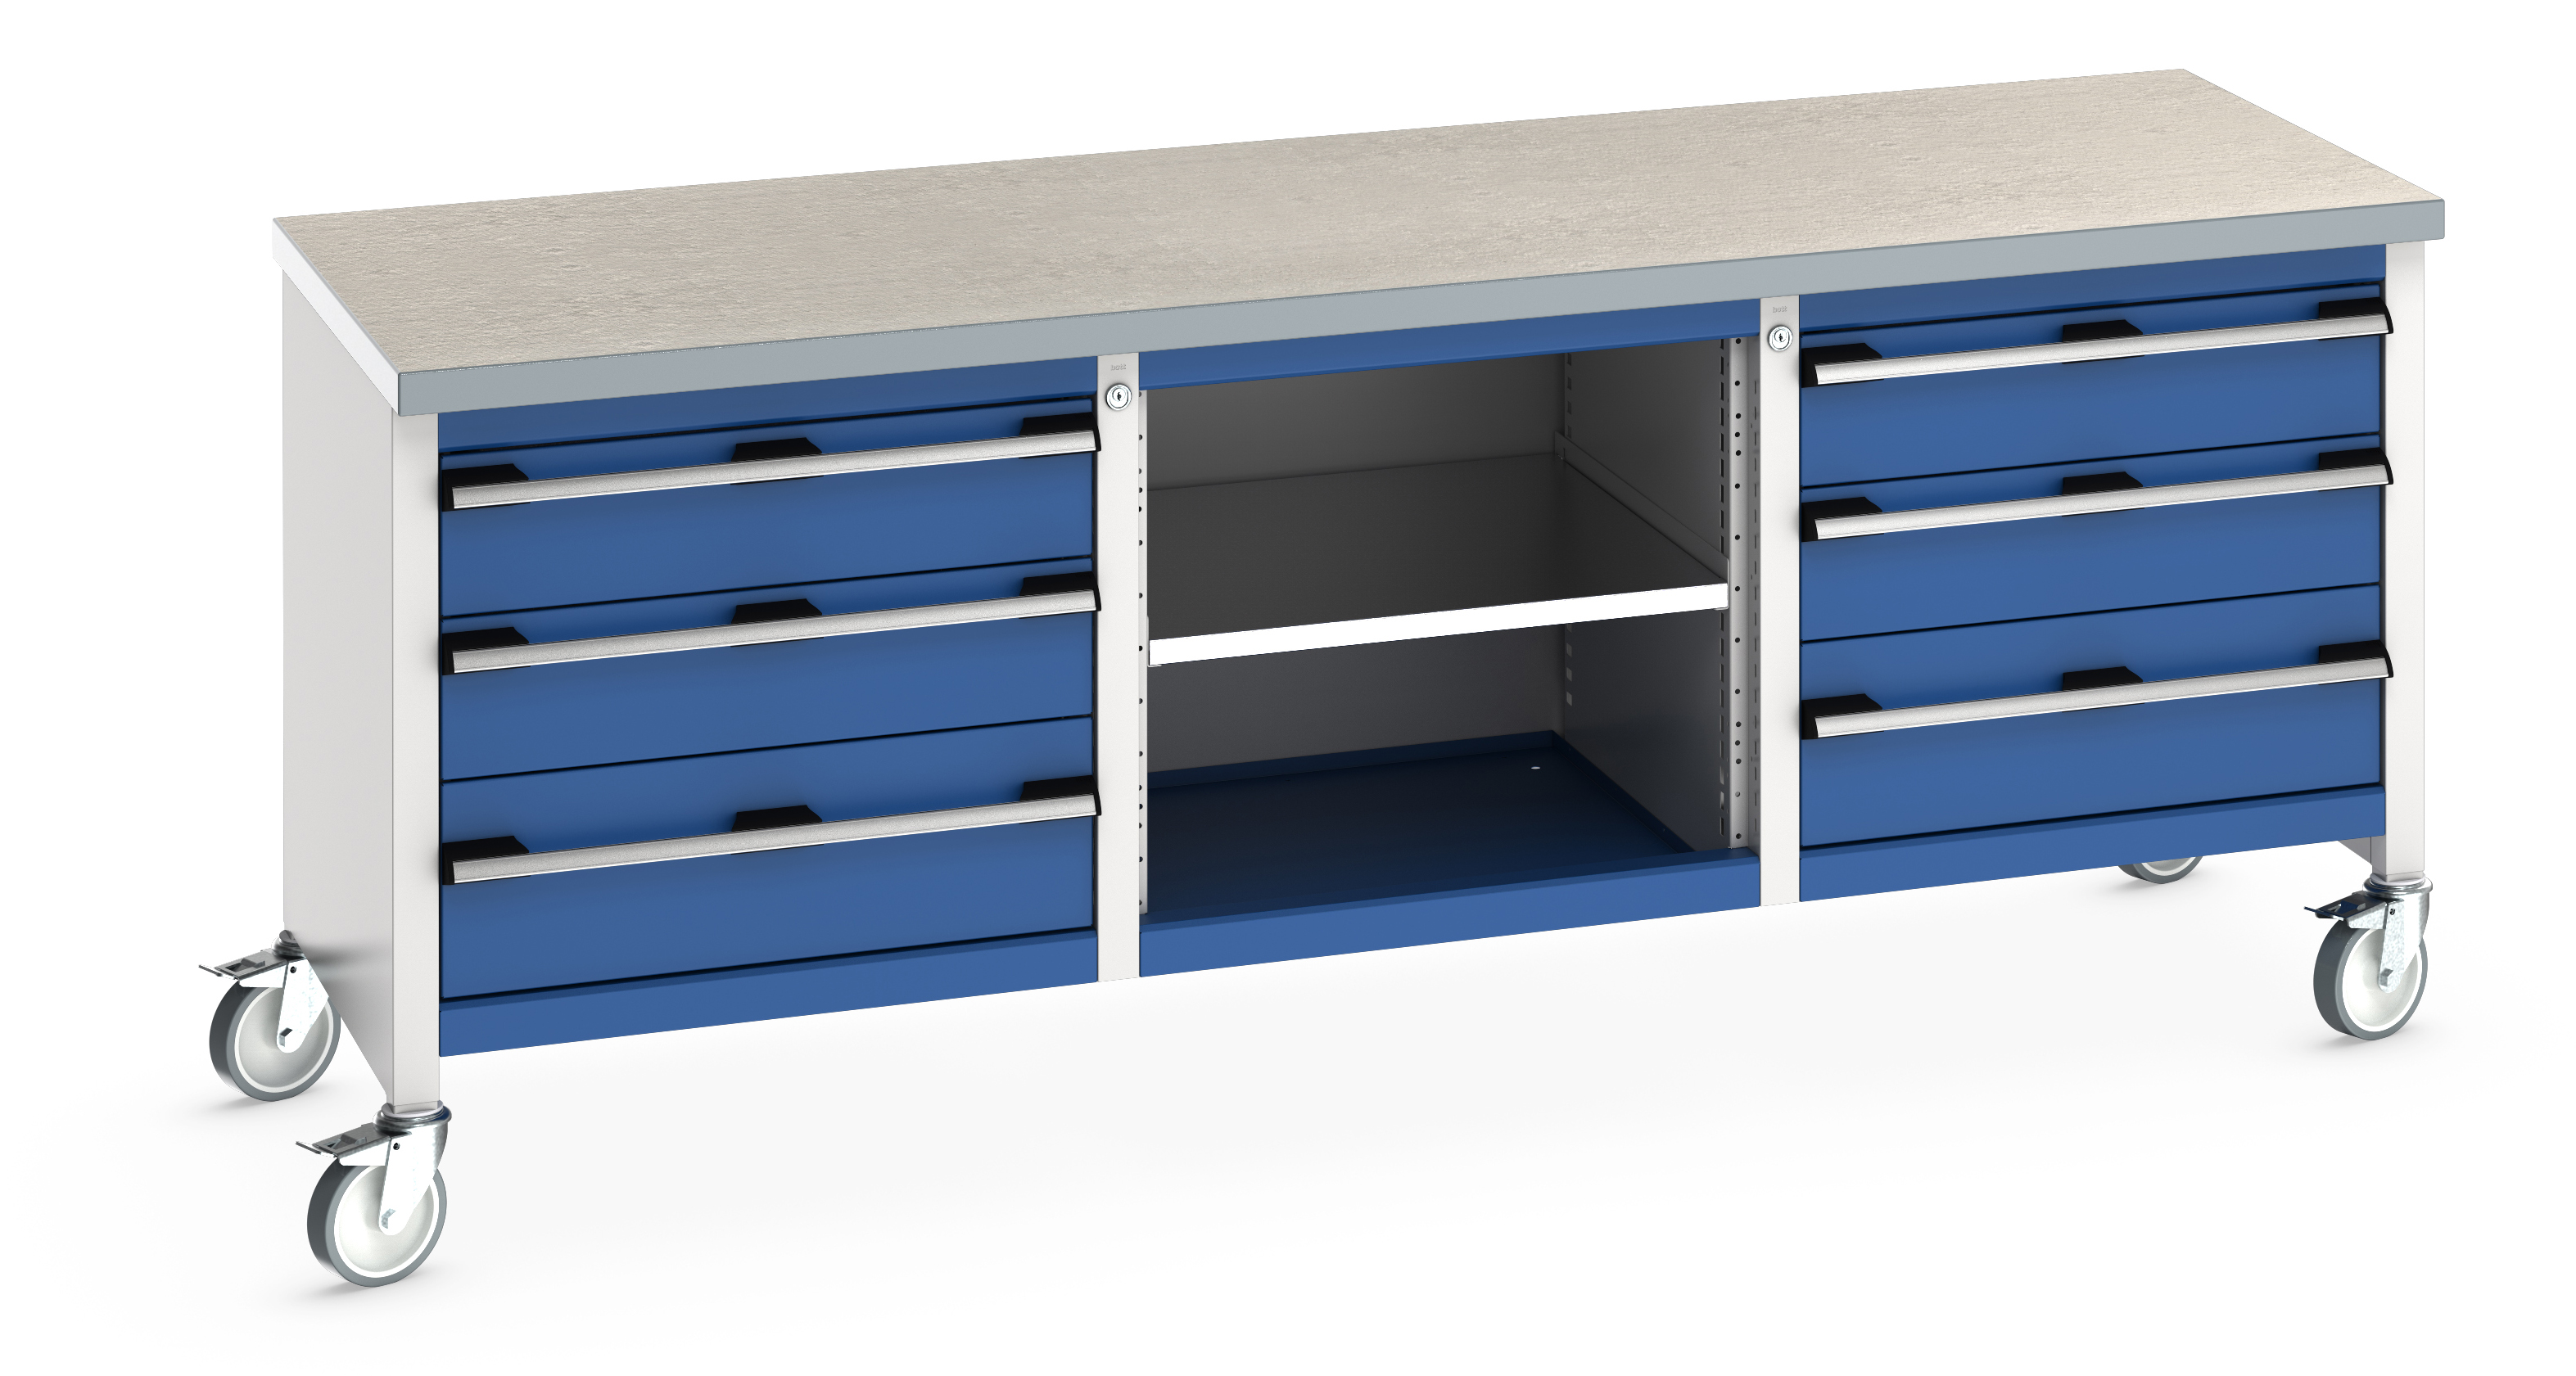 Bott Cubio Mobile Storage Bench With 3 Drawer Cabinet / Open Cupboard / 3 Drawer Cabinet - 41002132.11V